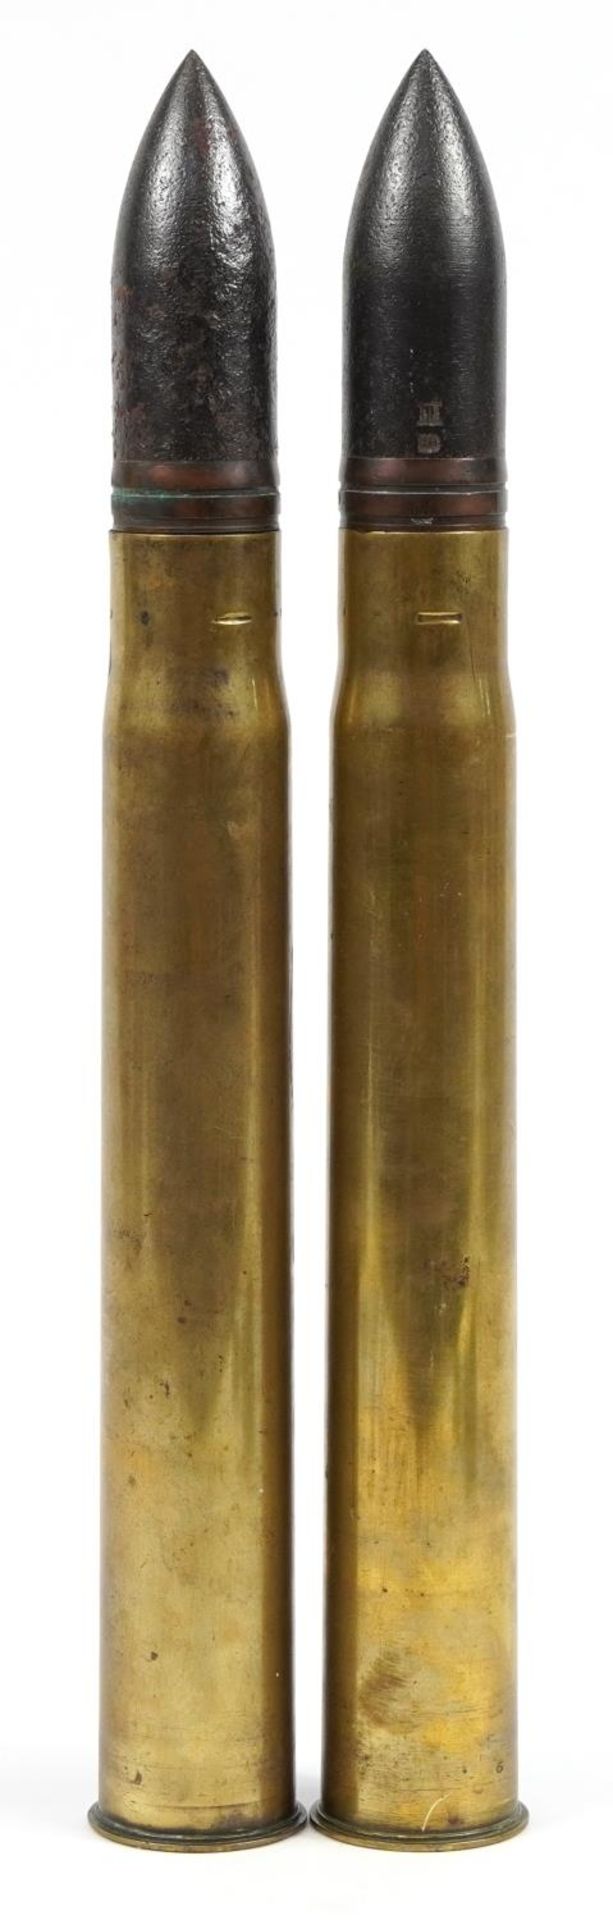 Pair of British military interest ammunition shells with heads, each with impressed marks, 51.5cm